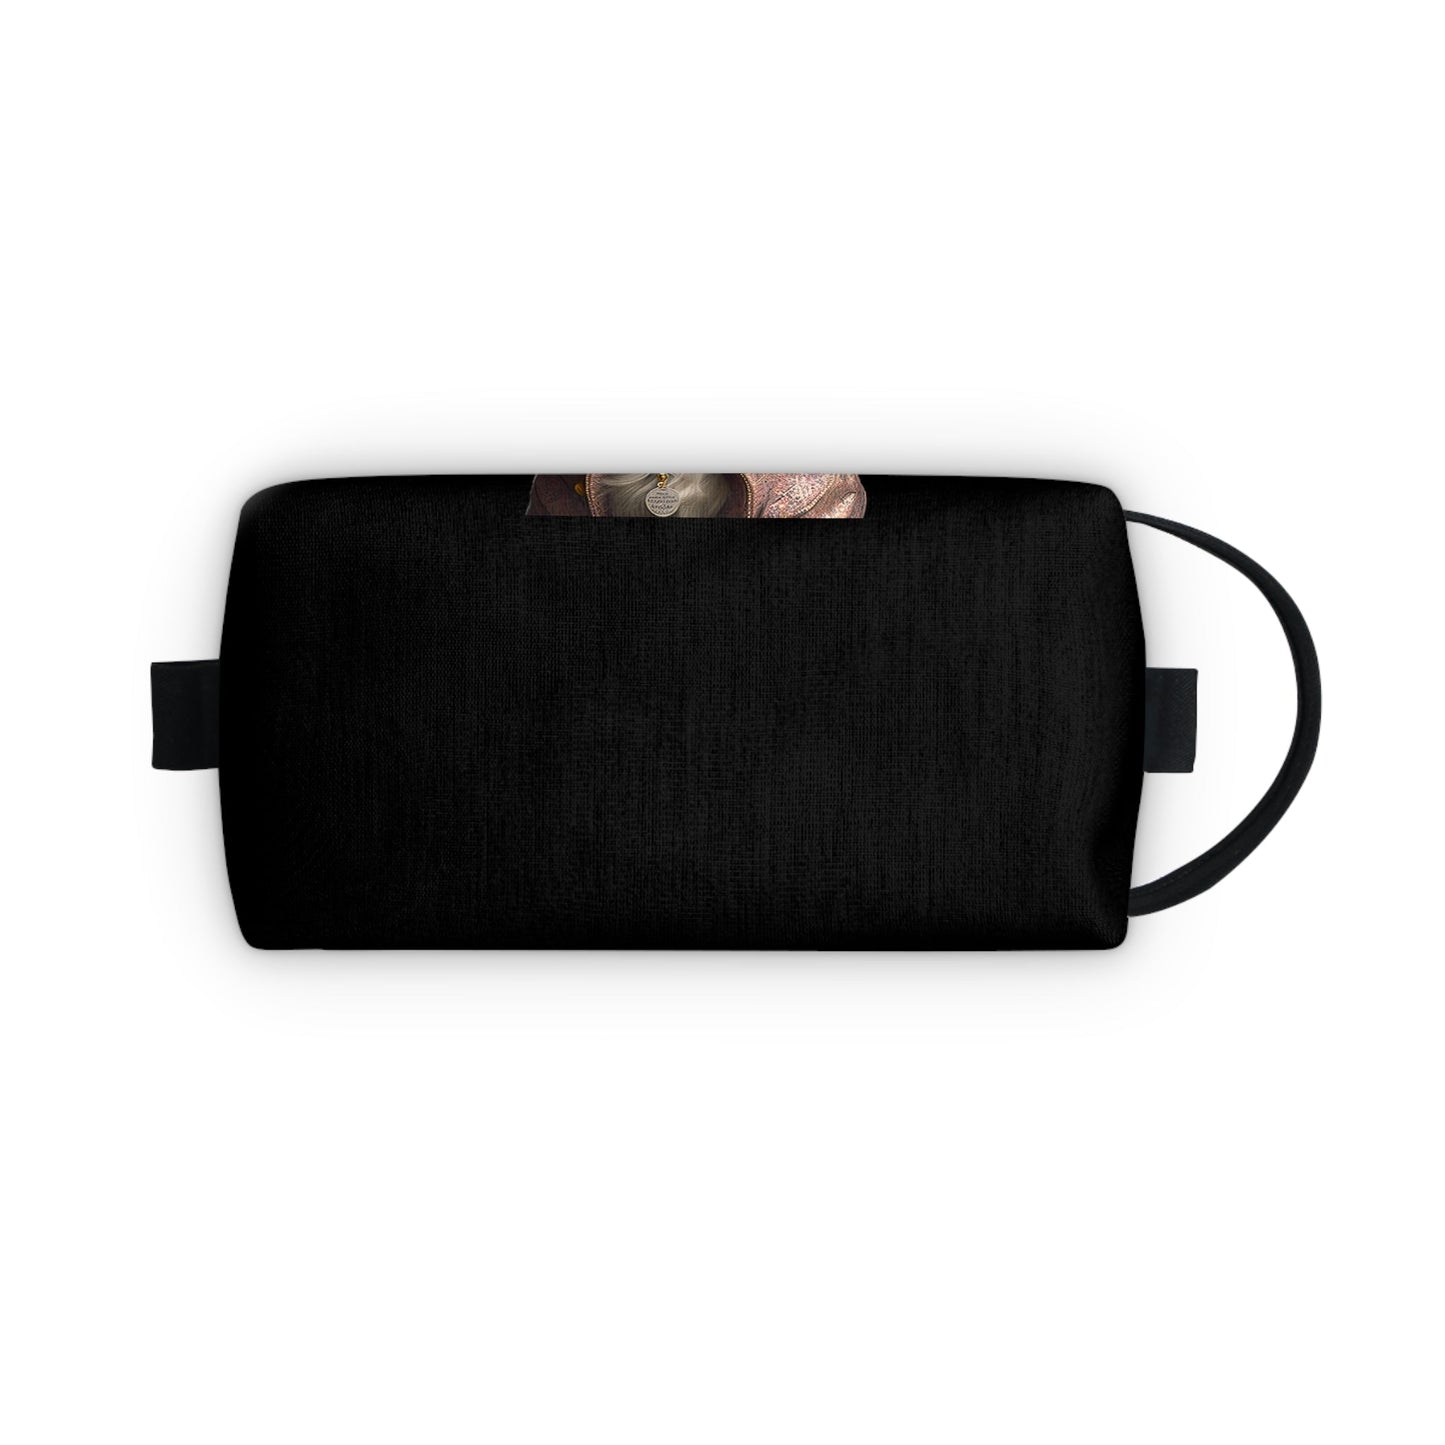 CATHERINE : Toiletry Bag - Shaggy Chic